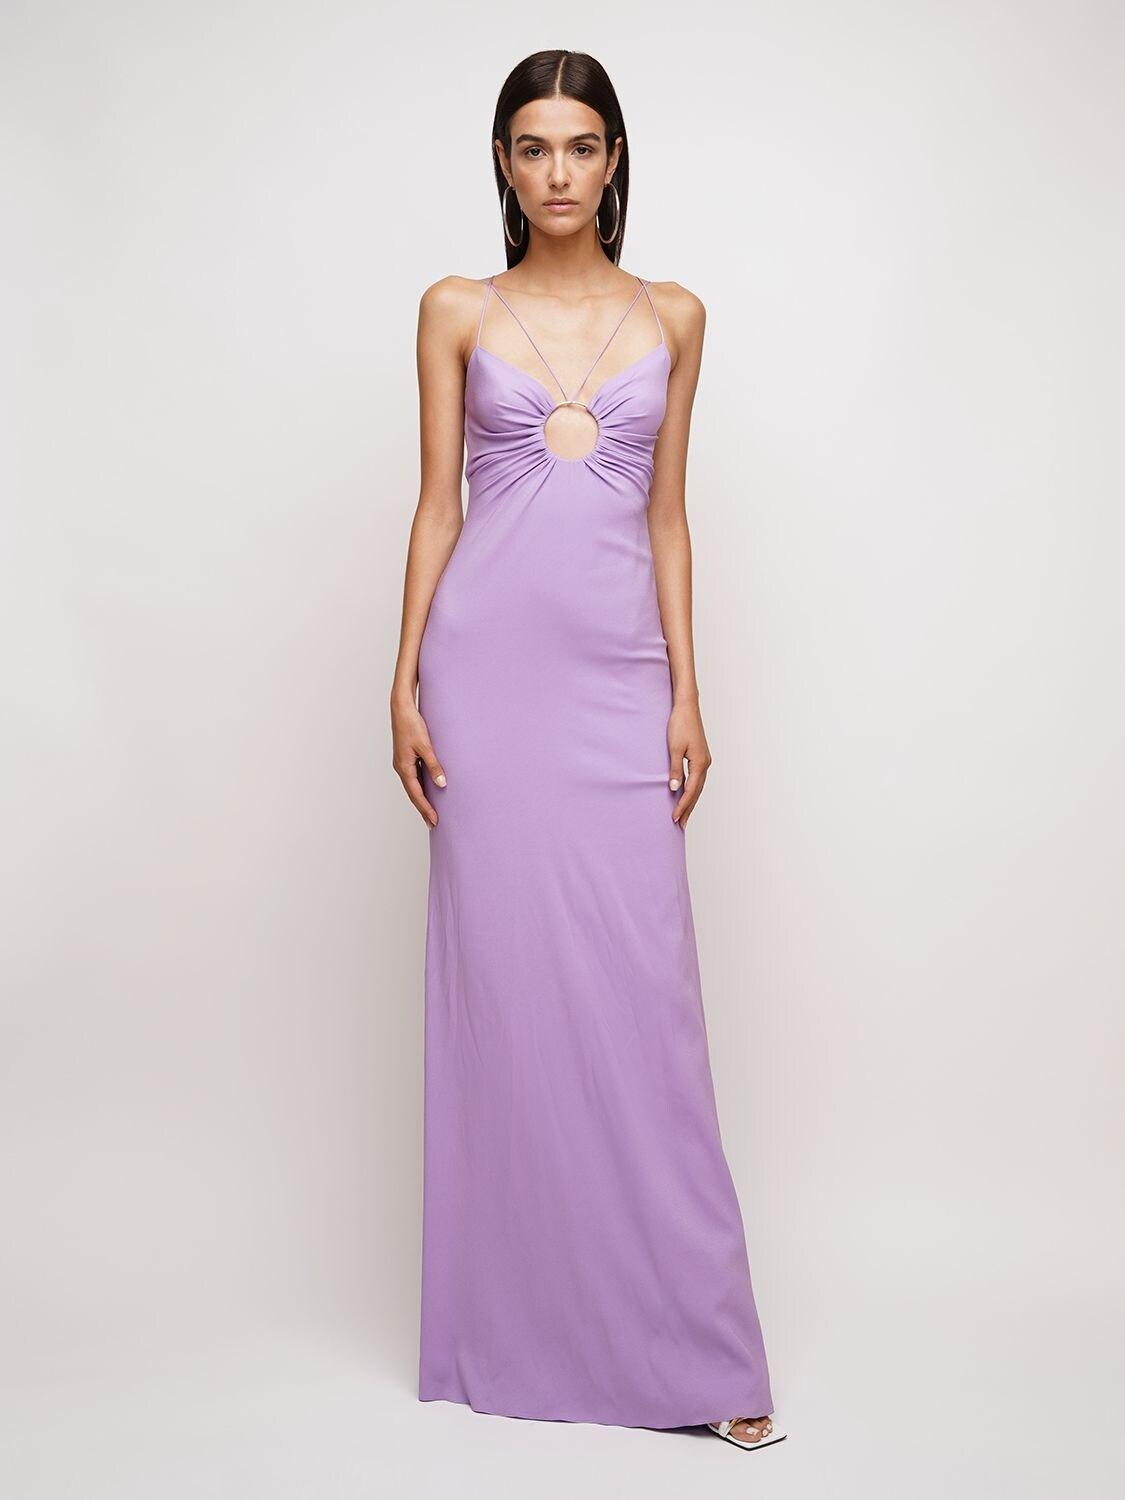 Versace Stretch Viscose Sable Long Dress in Purple | Lyst